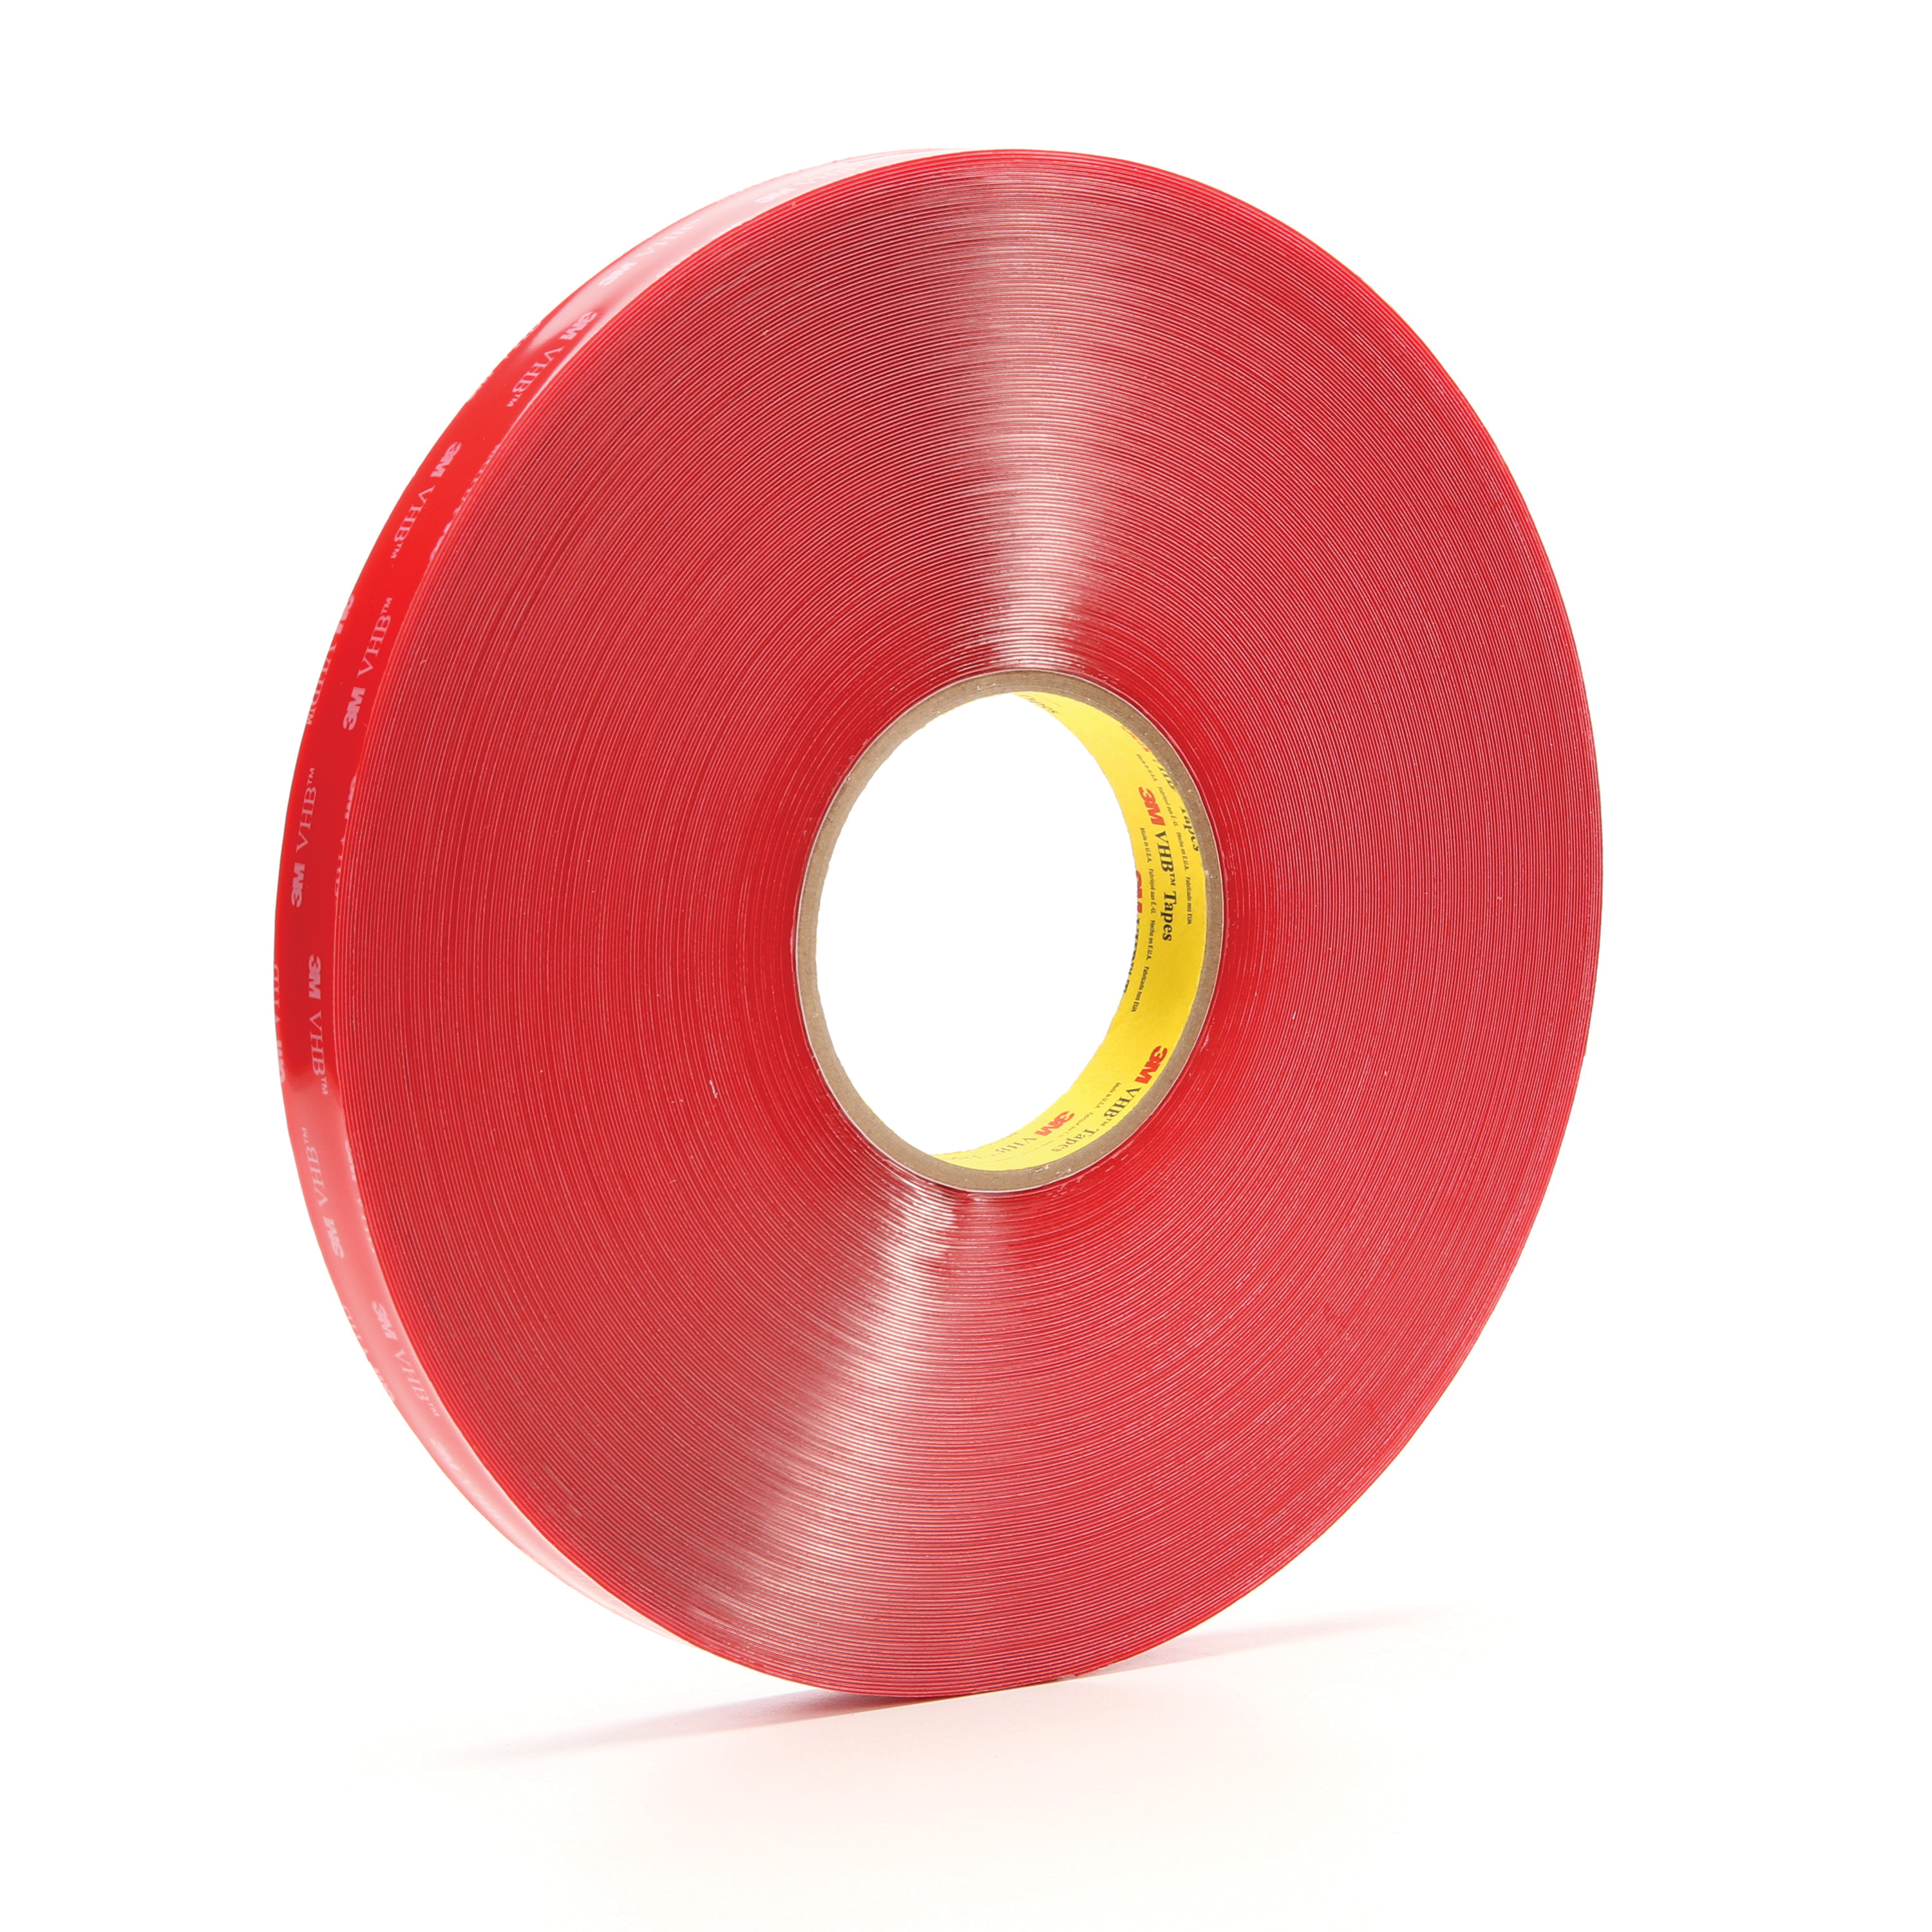 3M™ Ultra High Temperature Double Coated Tape 9077, 500 mm x 100 m